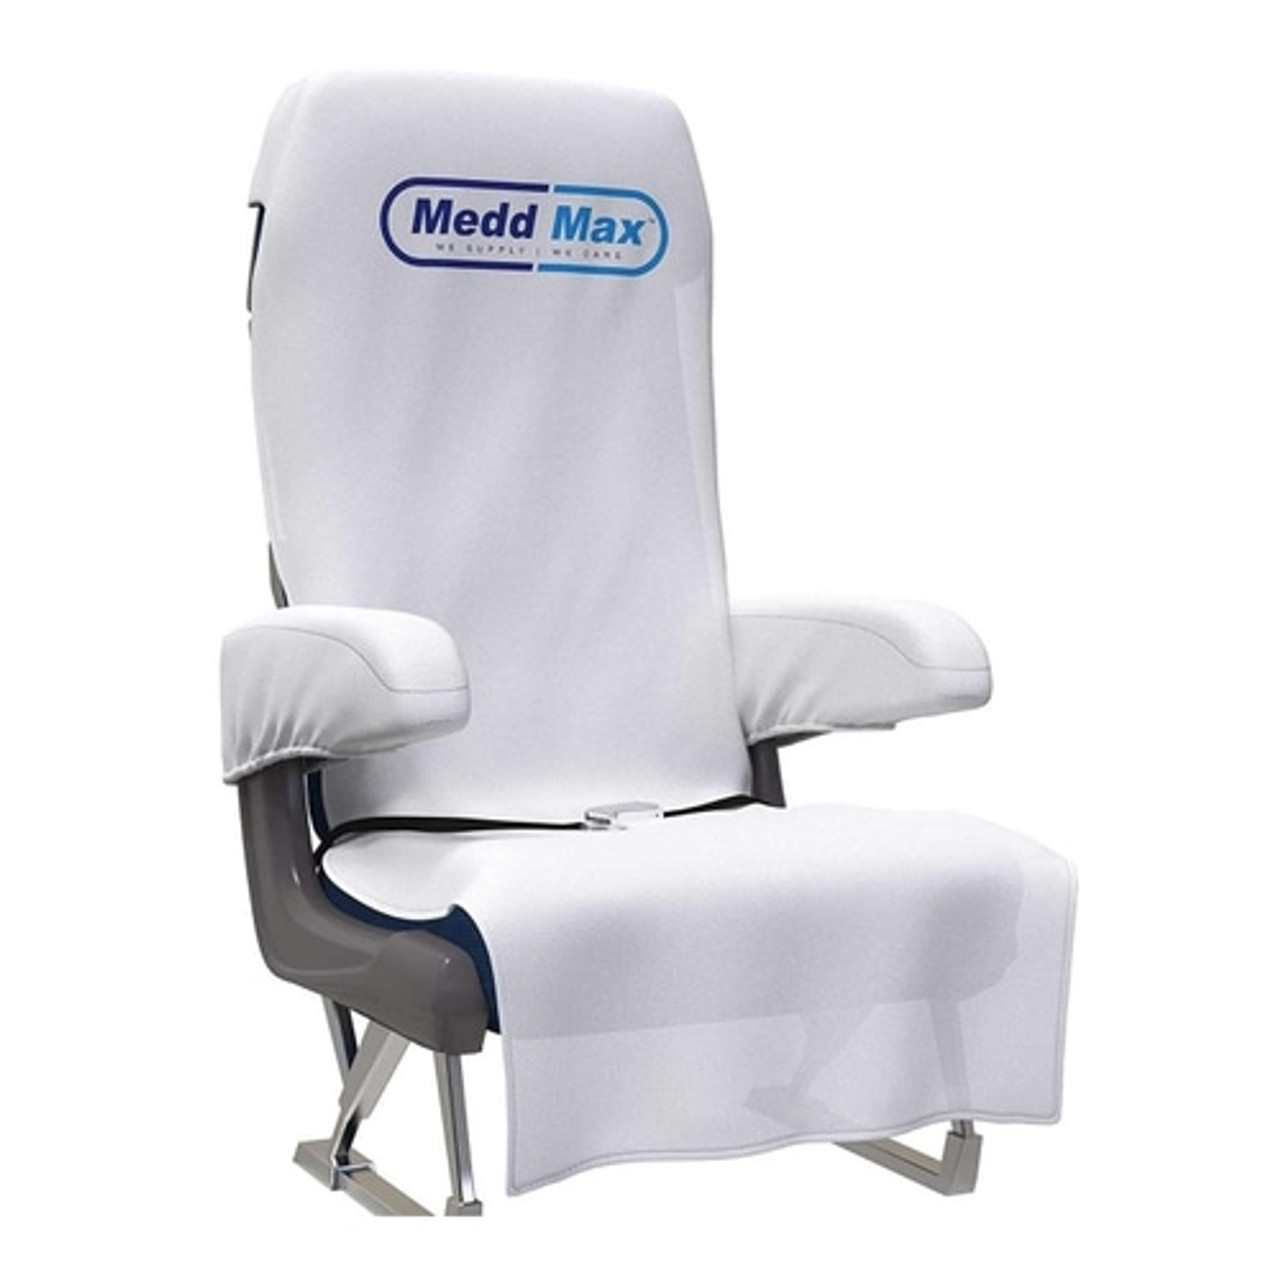 JJ CARE Disposable Airplane Seat Covers [Set of 2] Complete Plane